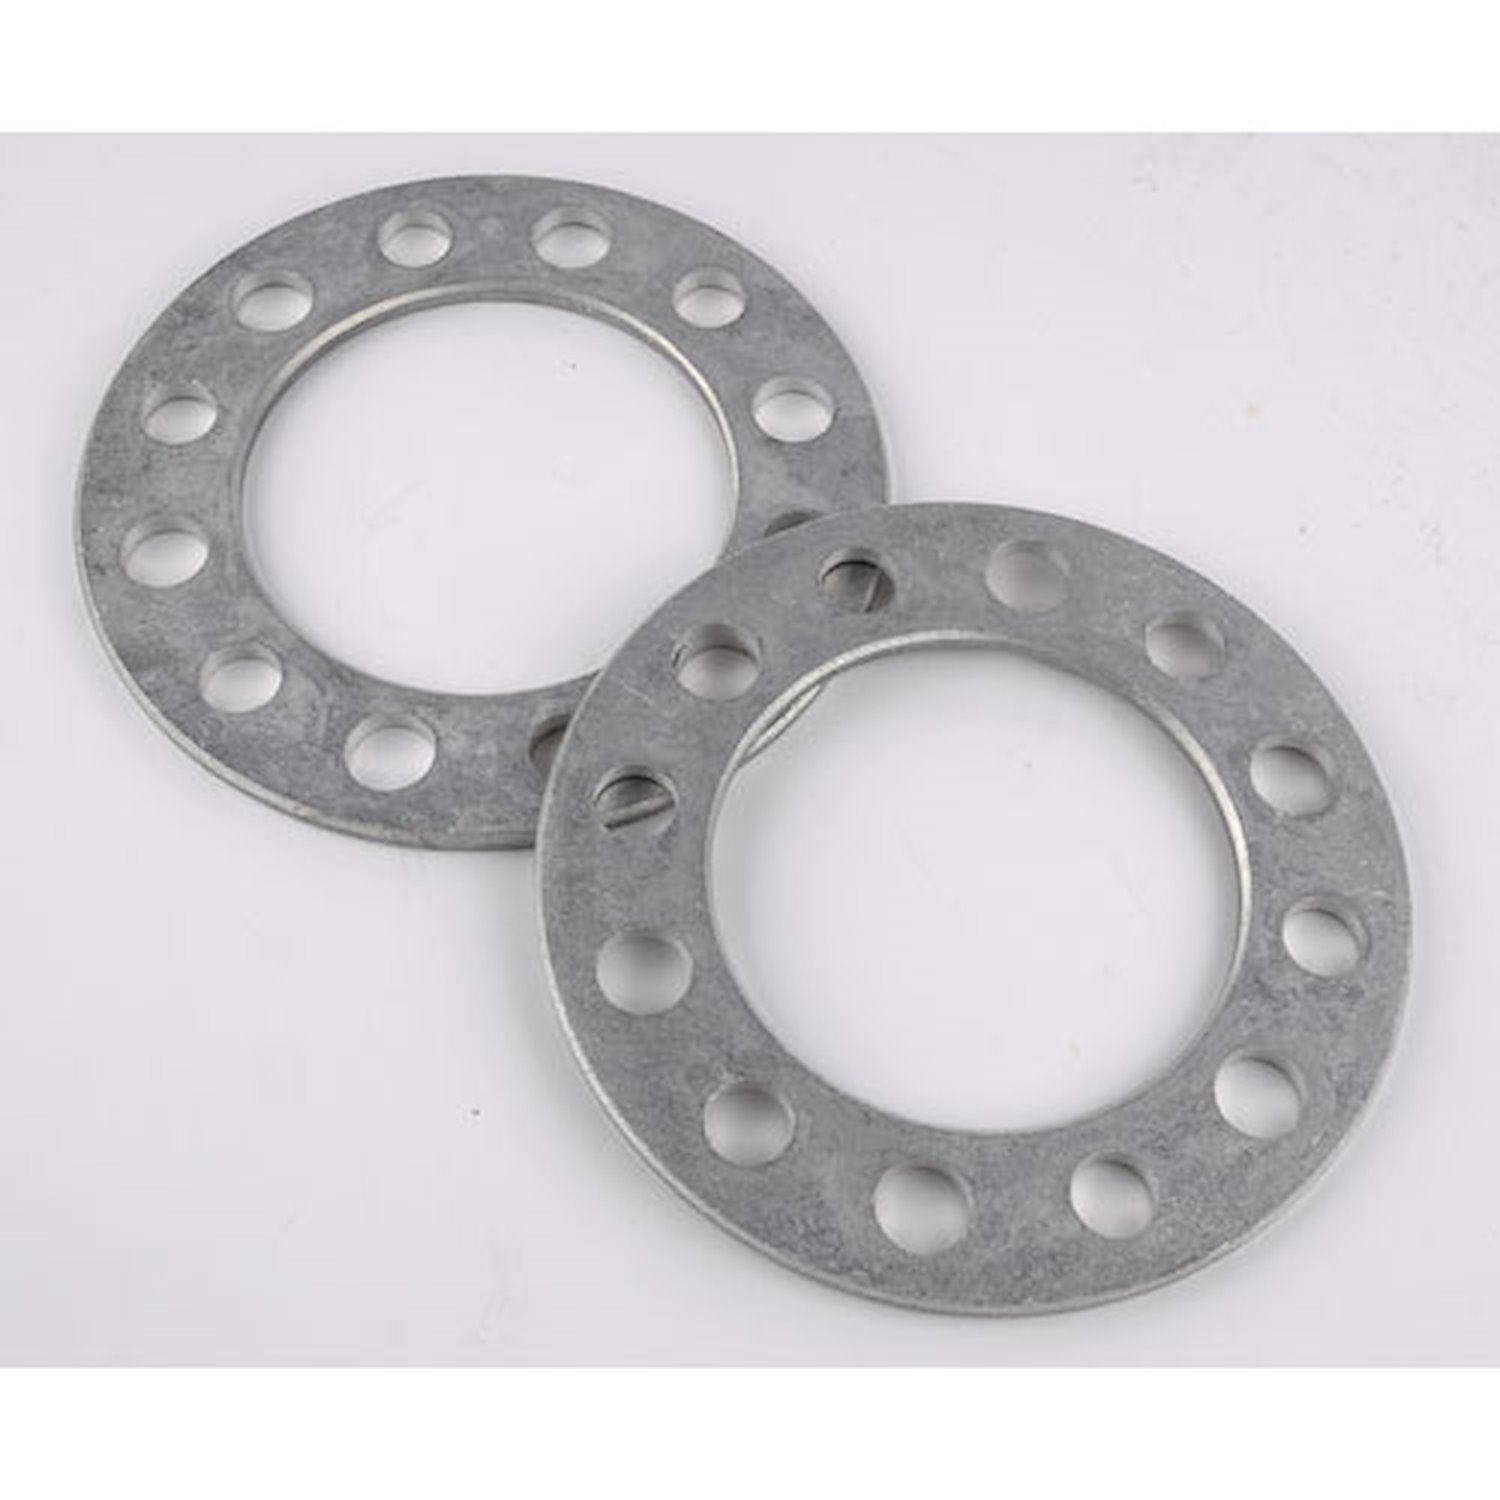 Wheel Spacers 1/4" Thick